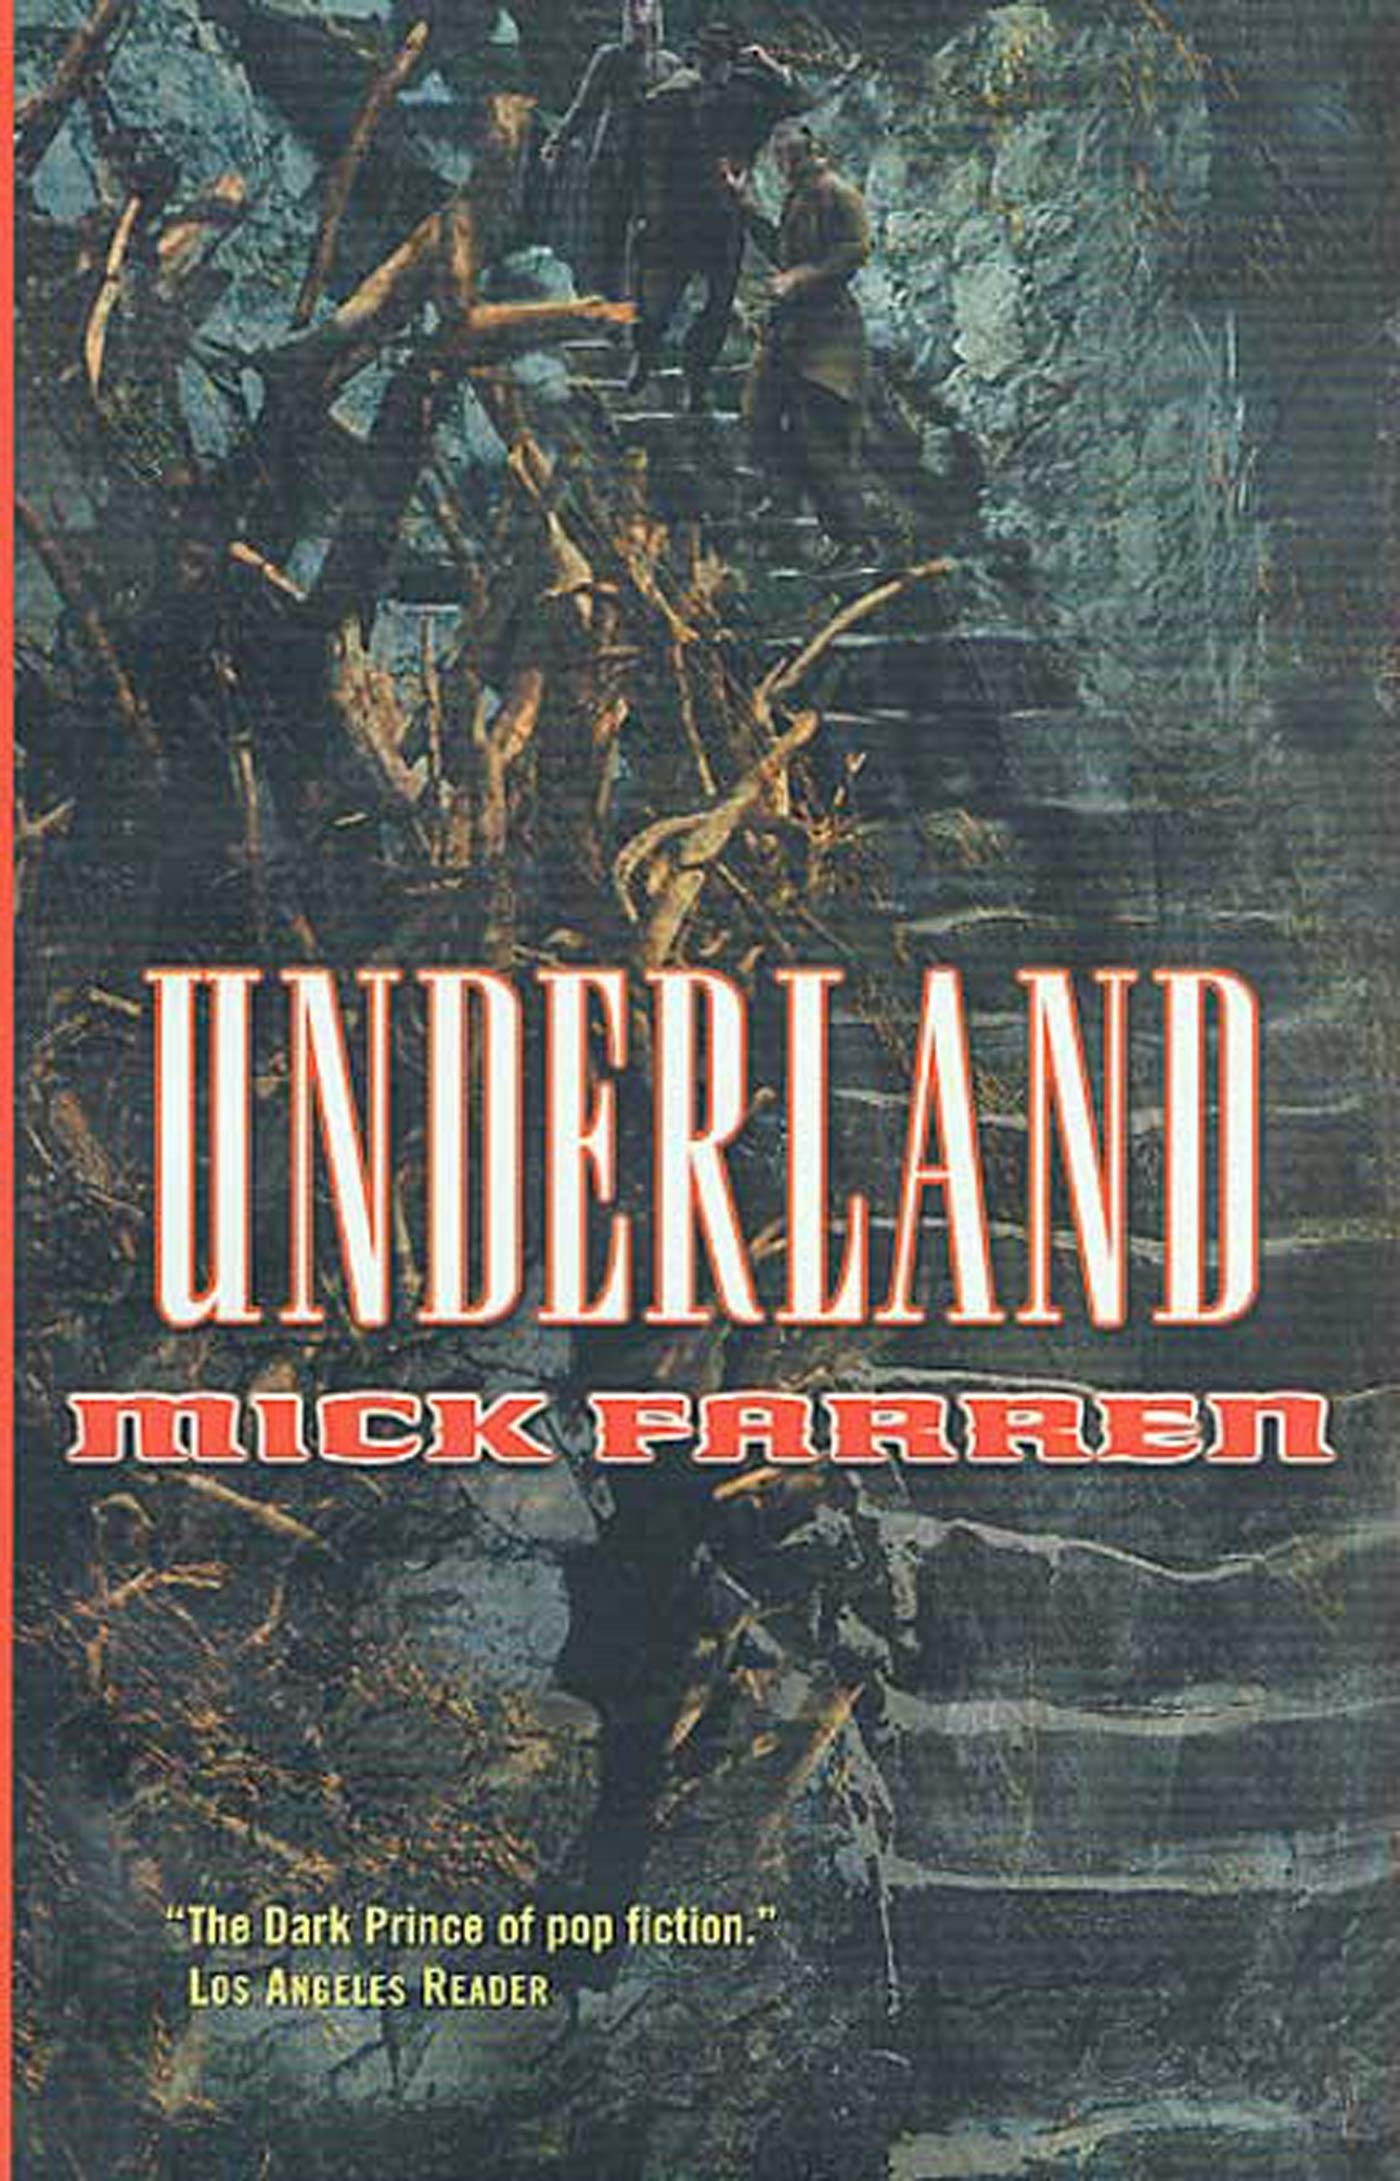 Cover for the book titled as: Underland